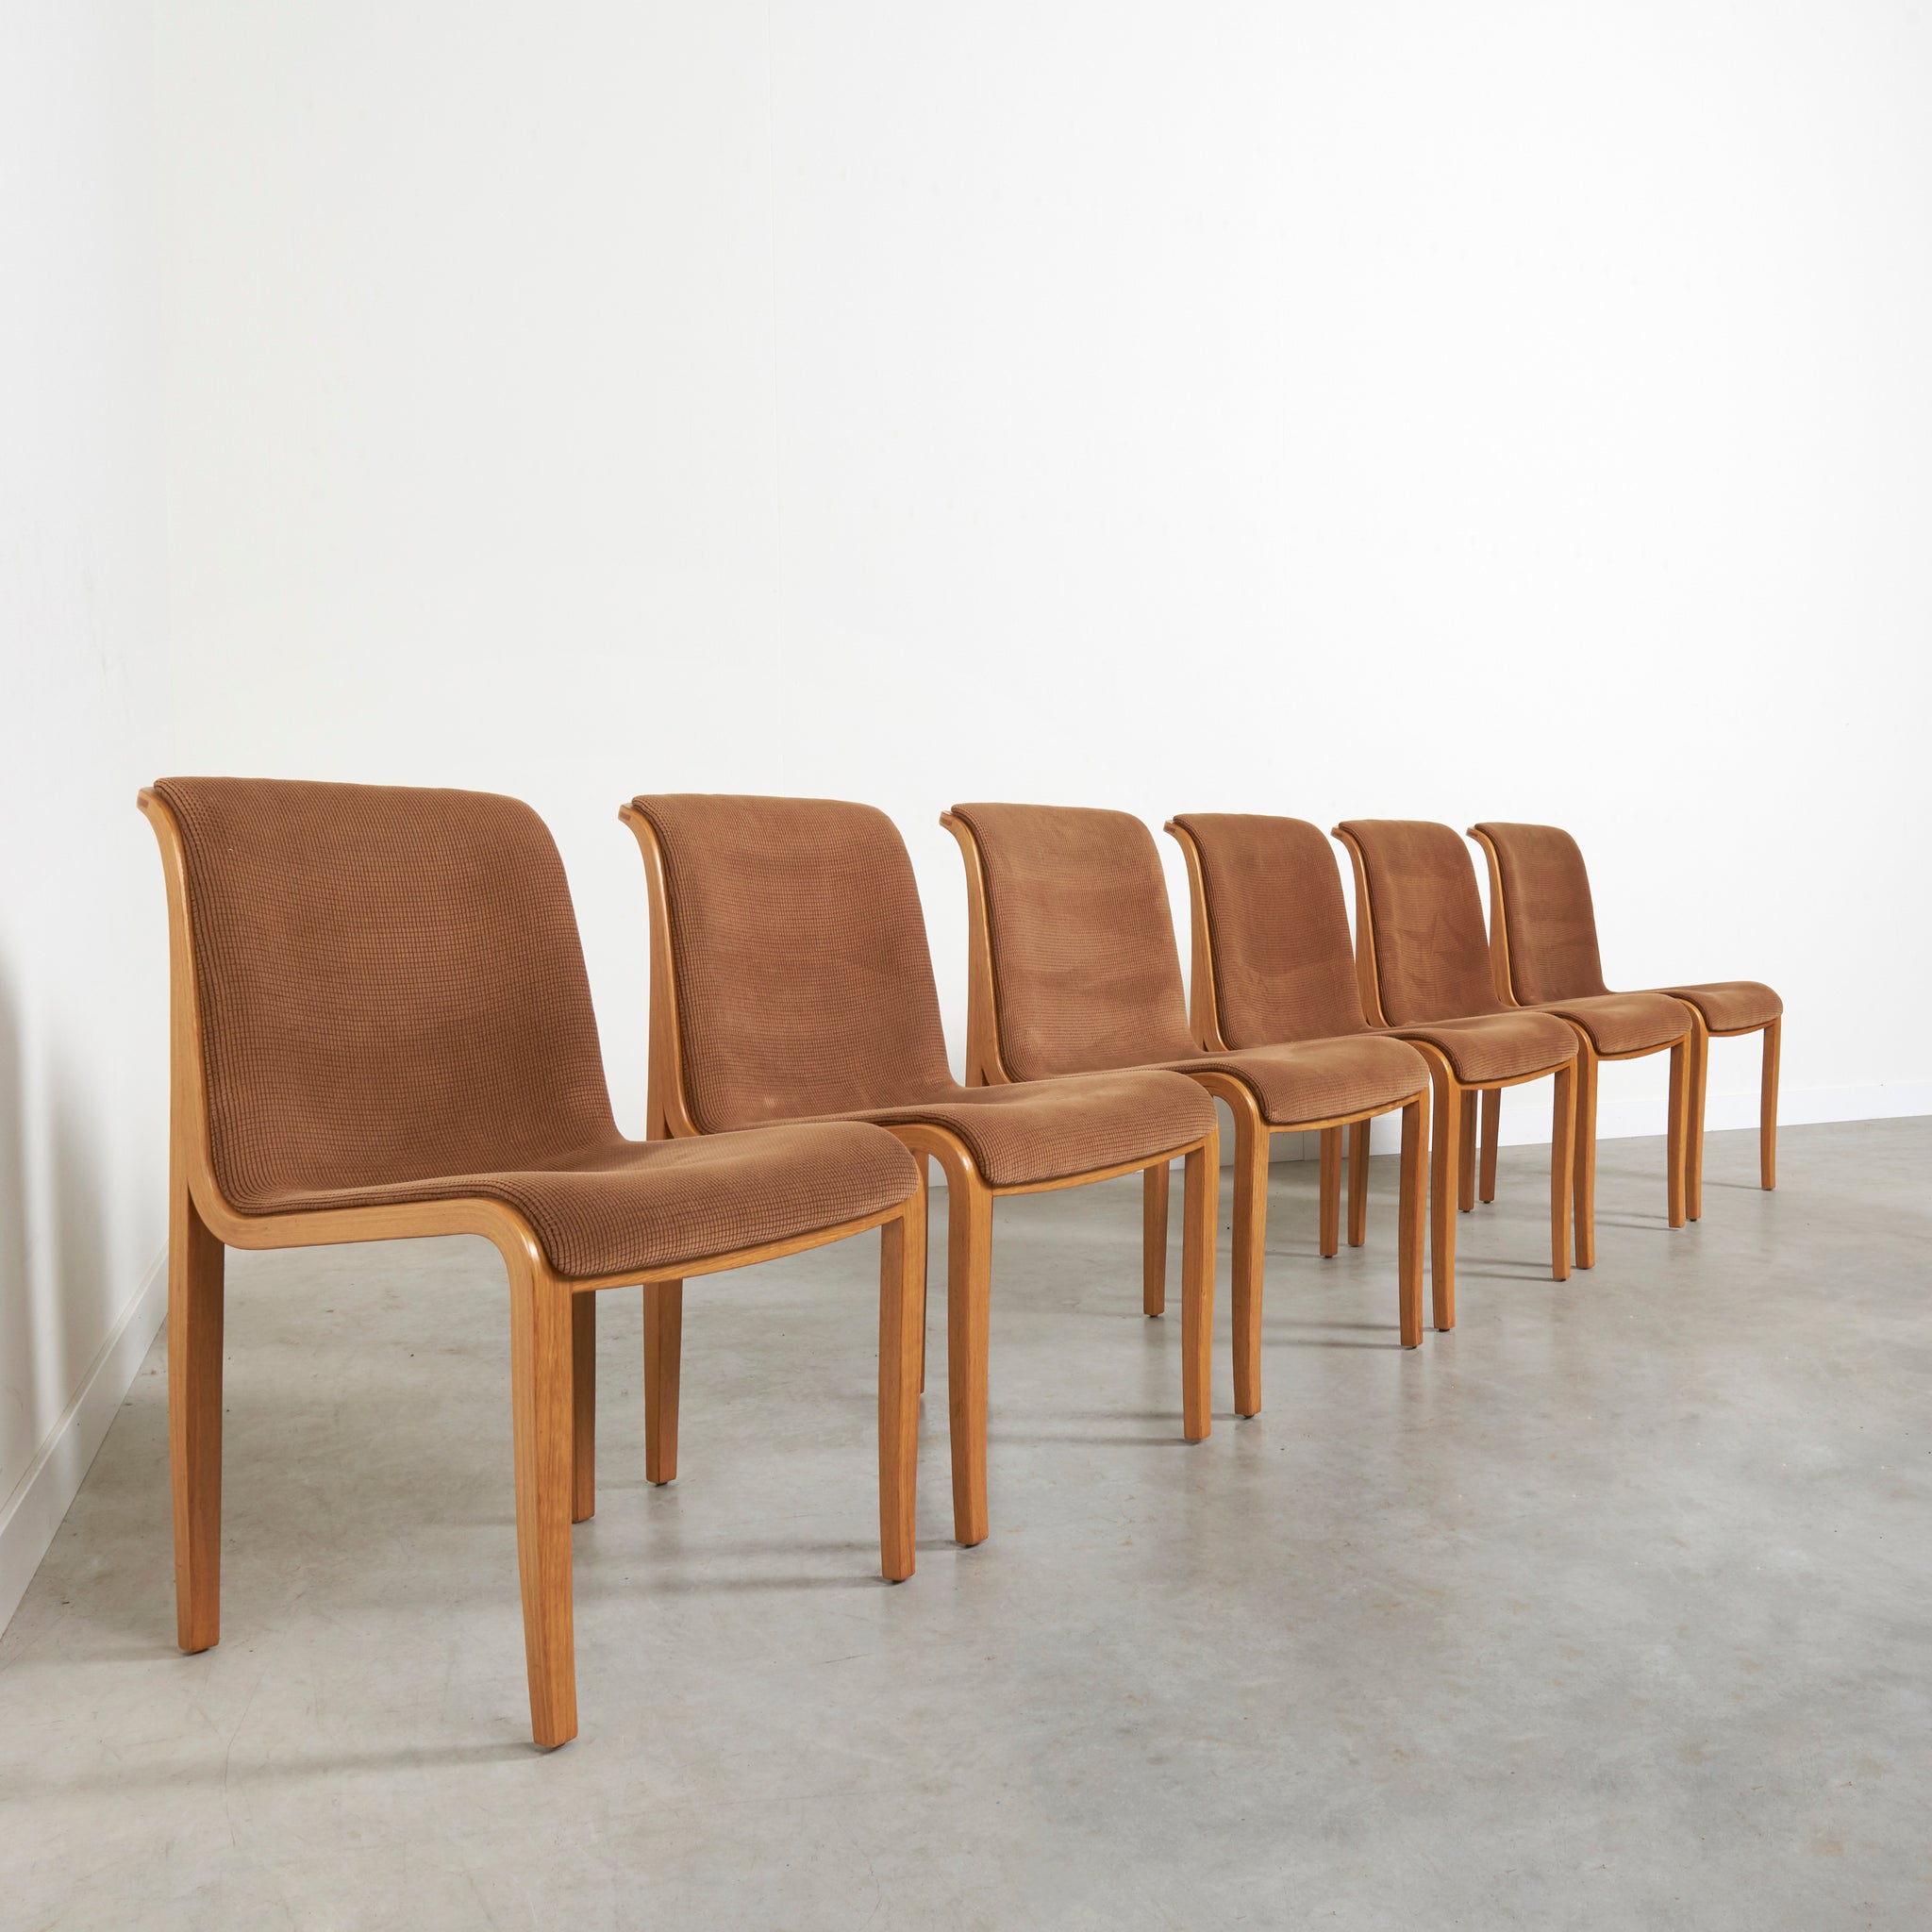 Six Bill Stephens dining chairs for Knoll, 1960s